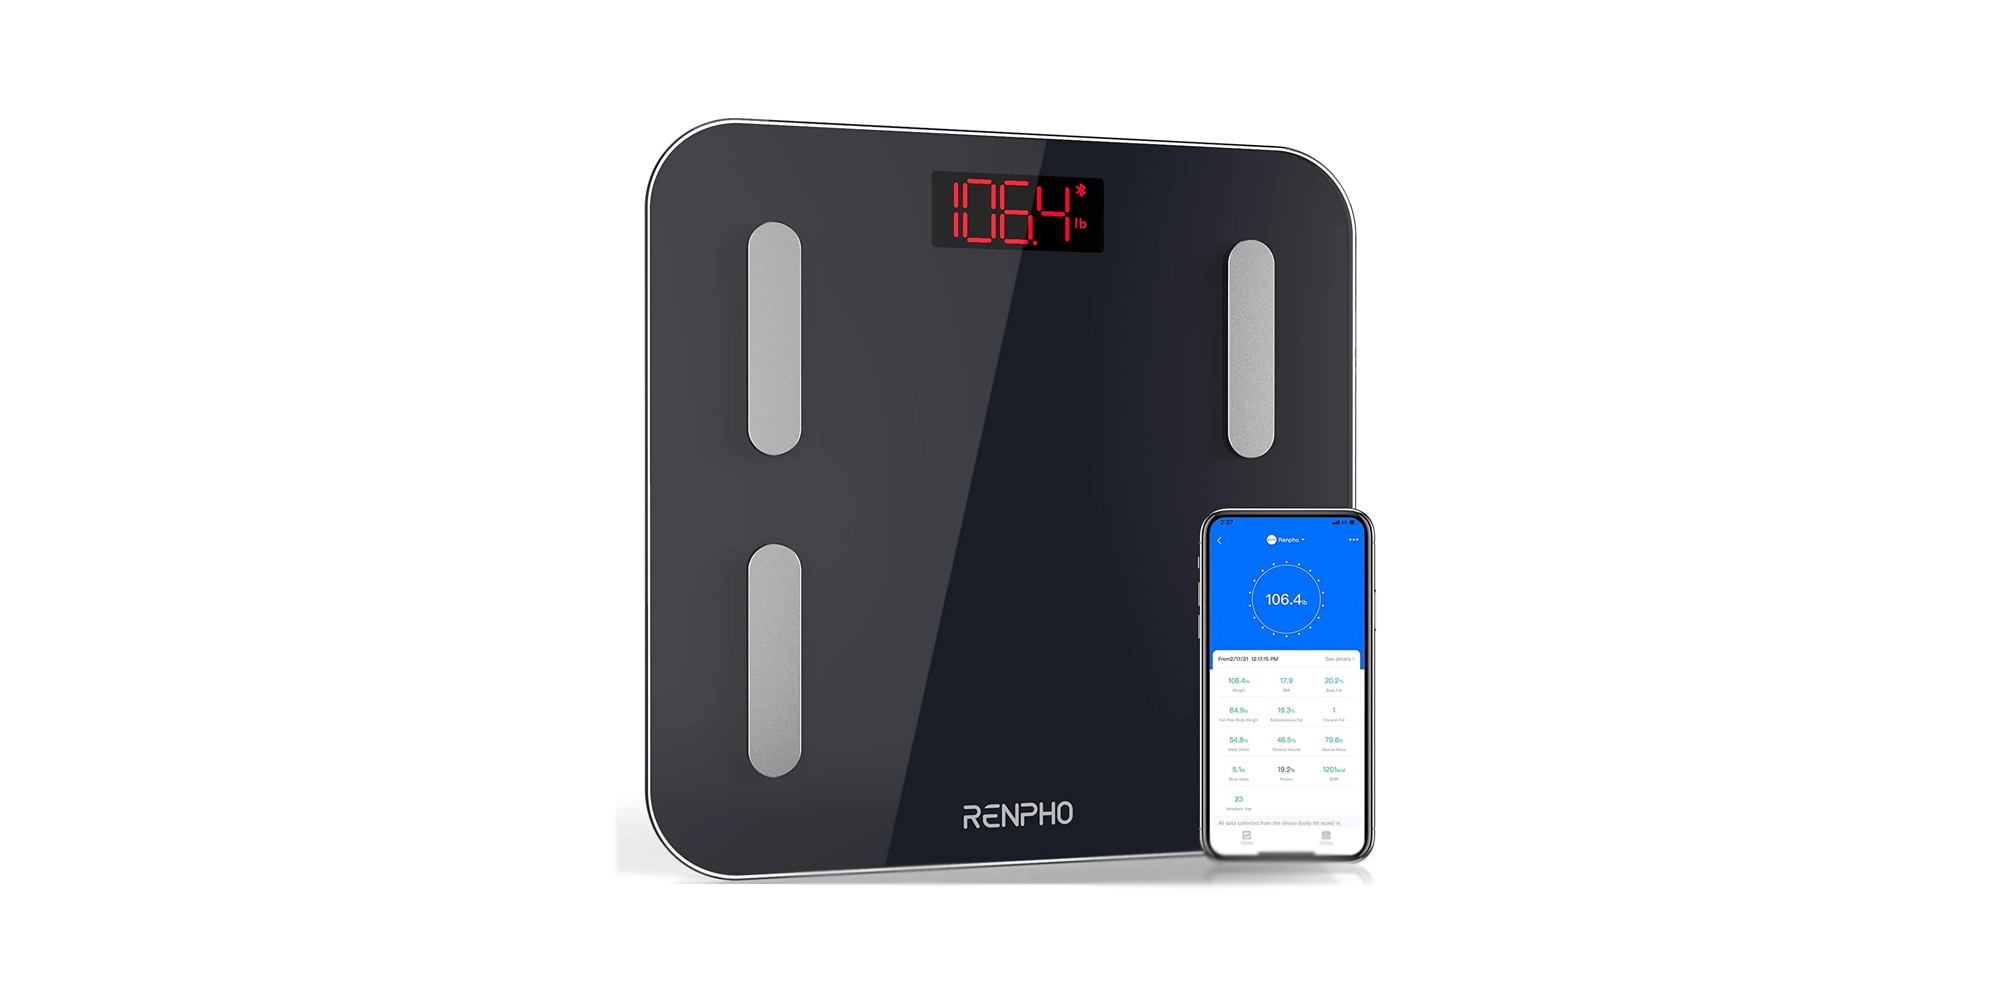 https://9to5toys.com/wp-content/uploads/sites/5/2022/04/Renpho-Smart-body-Fat-Scale.jpg